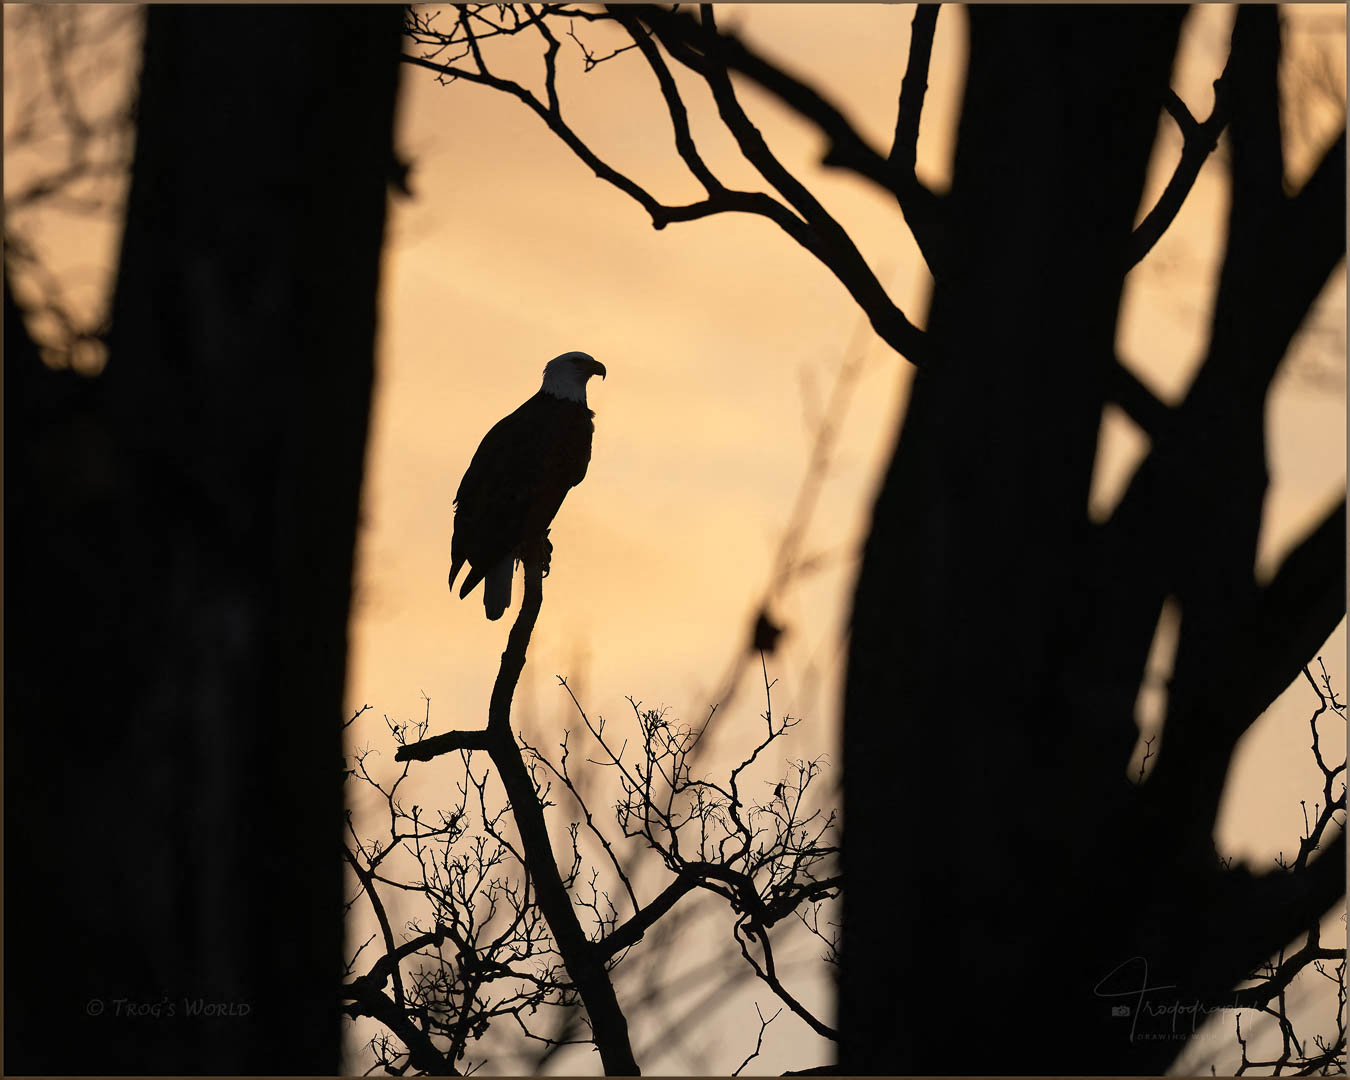 American Bald Eagle silhouetted by winter's evening